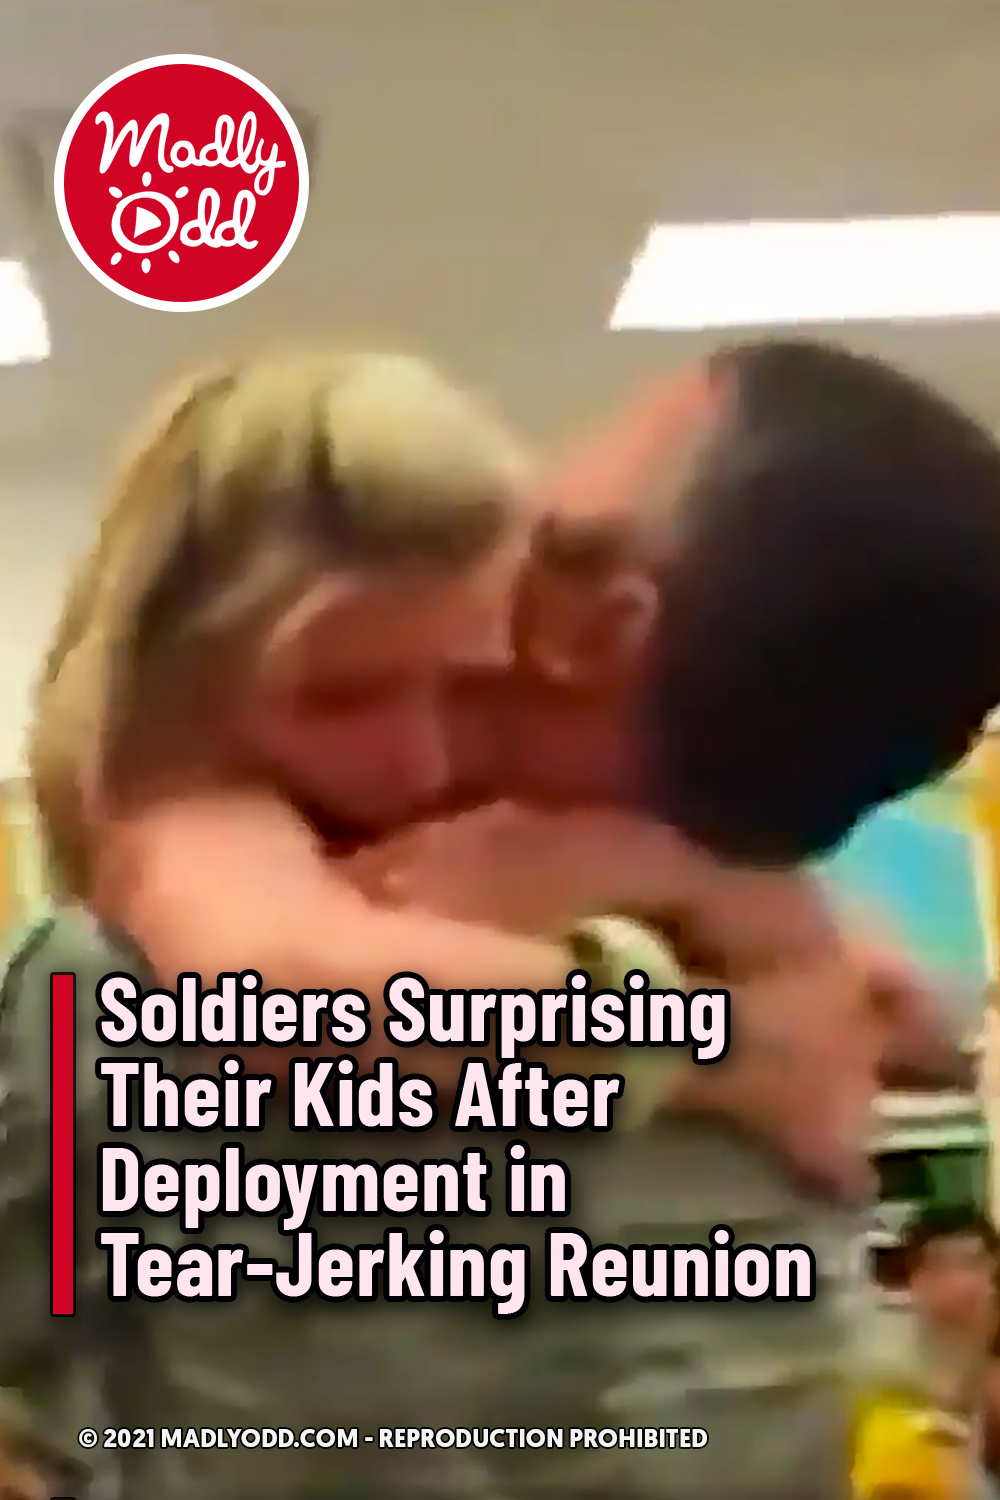 Soldiers Surprising Their Kids After Deployment in Tear-Jerking Reunion